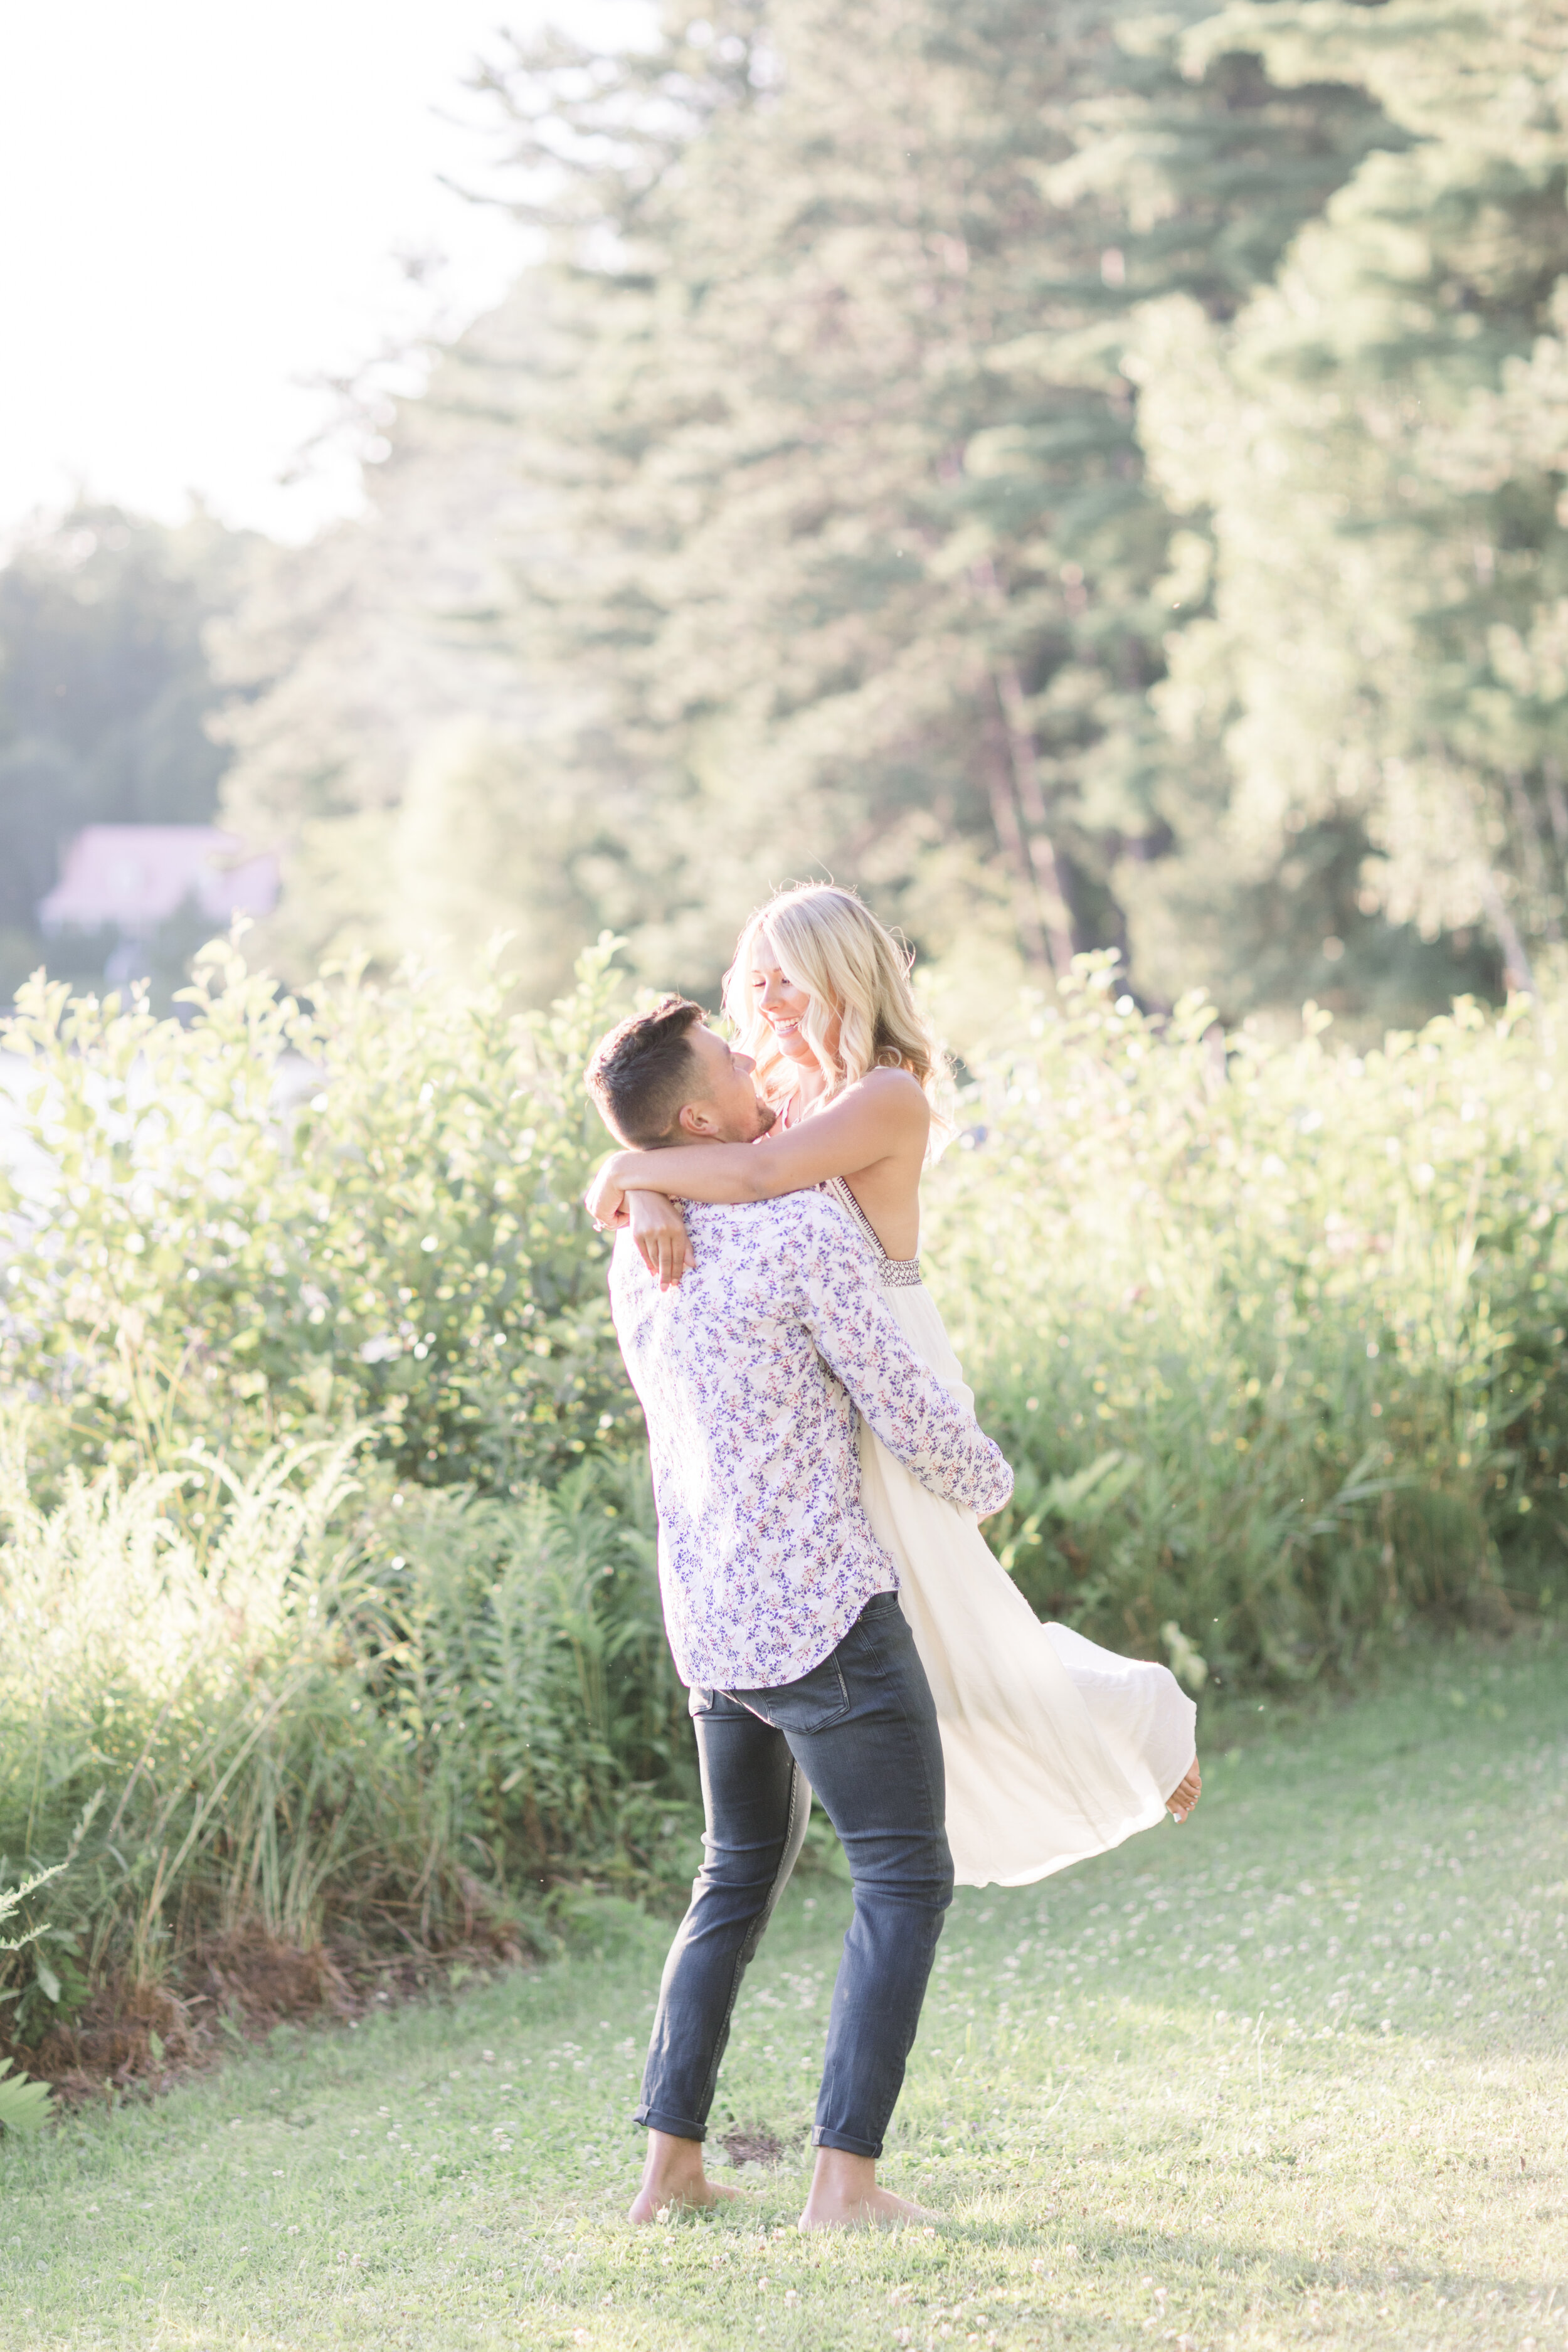  Barefoot couple in quebec dancing playfully in the grass during their sunset cottage engagement session. Boho engagement session white dress for engagement session playful engagement session posing inspo engagement photographer in quebec best poses 